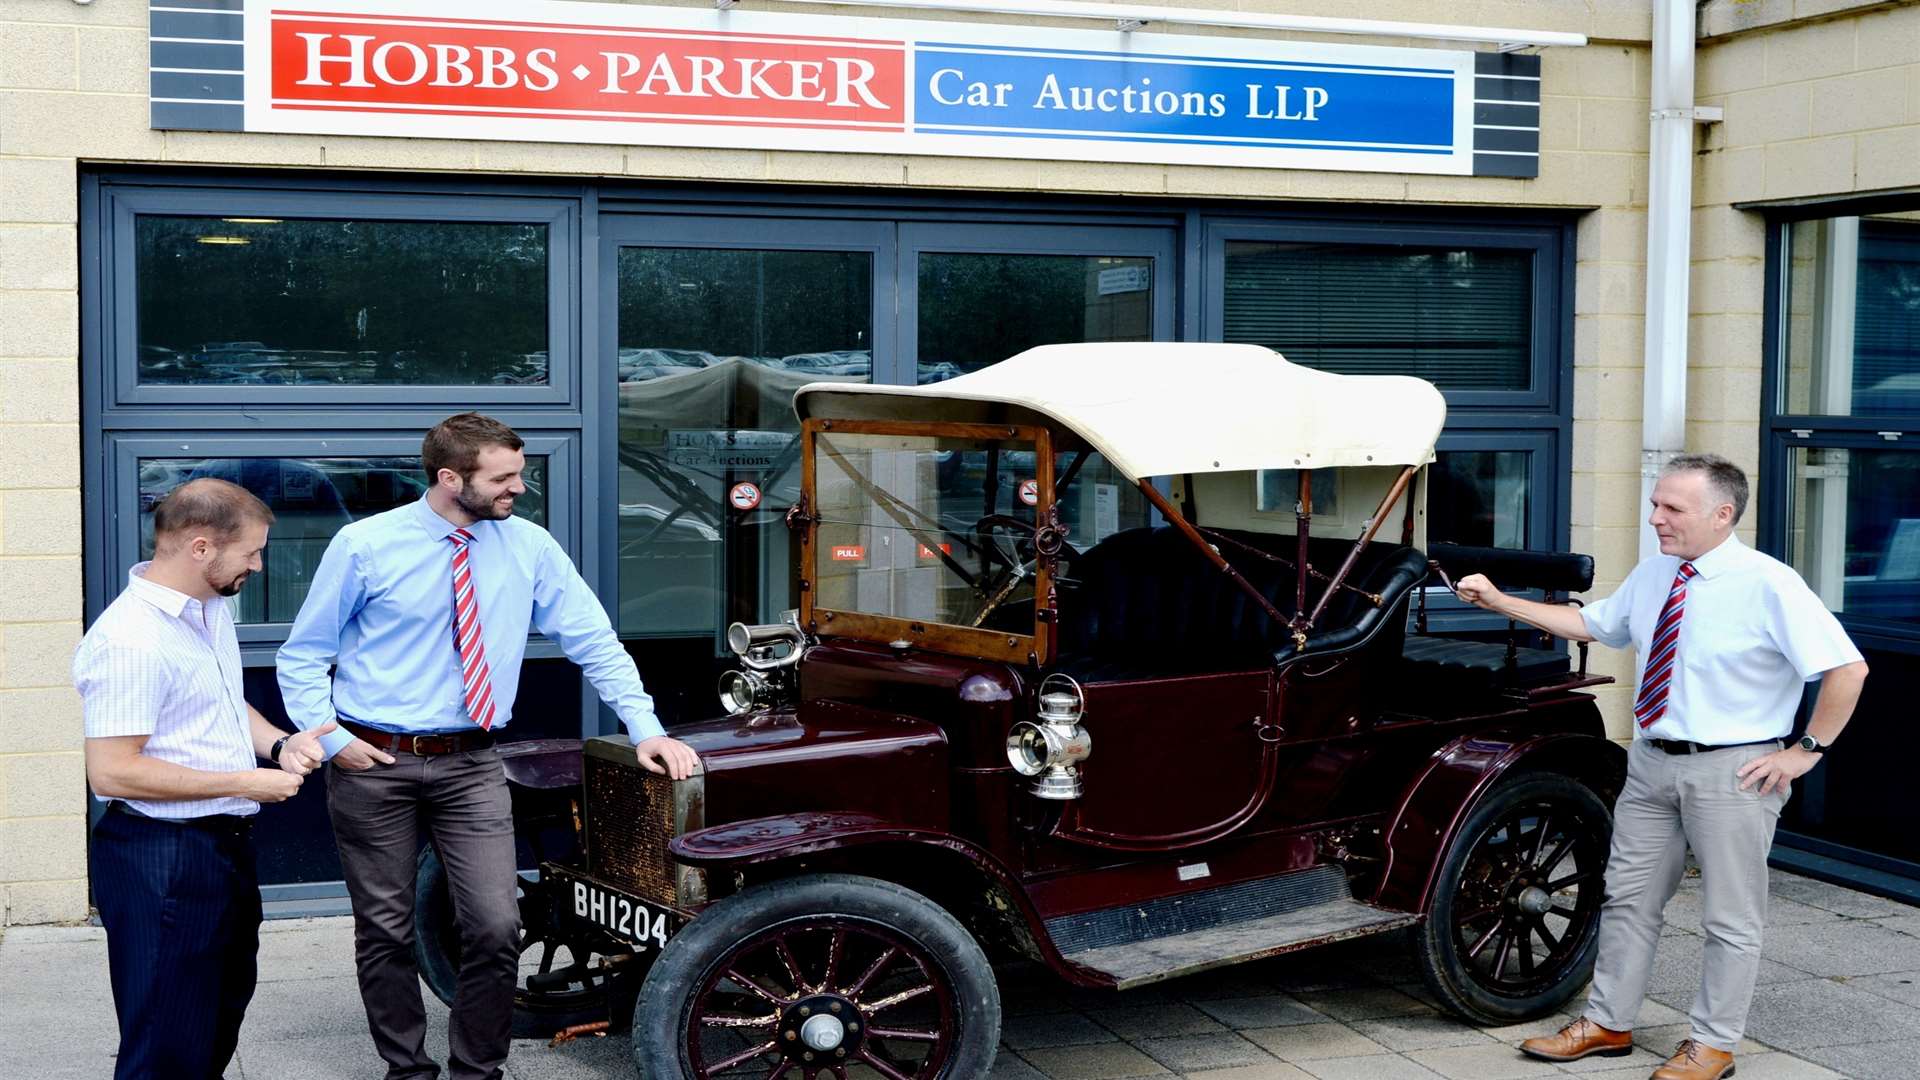 The Hobbs Parker Car Auctions team examine a 1909 Rover 8 Tourer, one of the entries for their next classic car auction